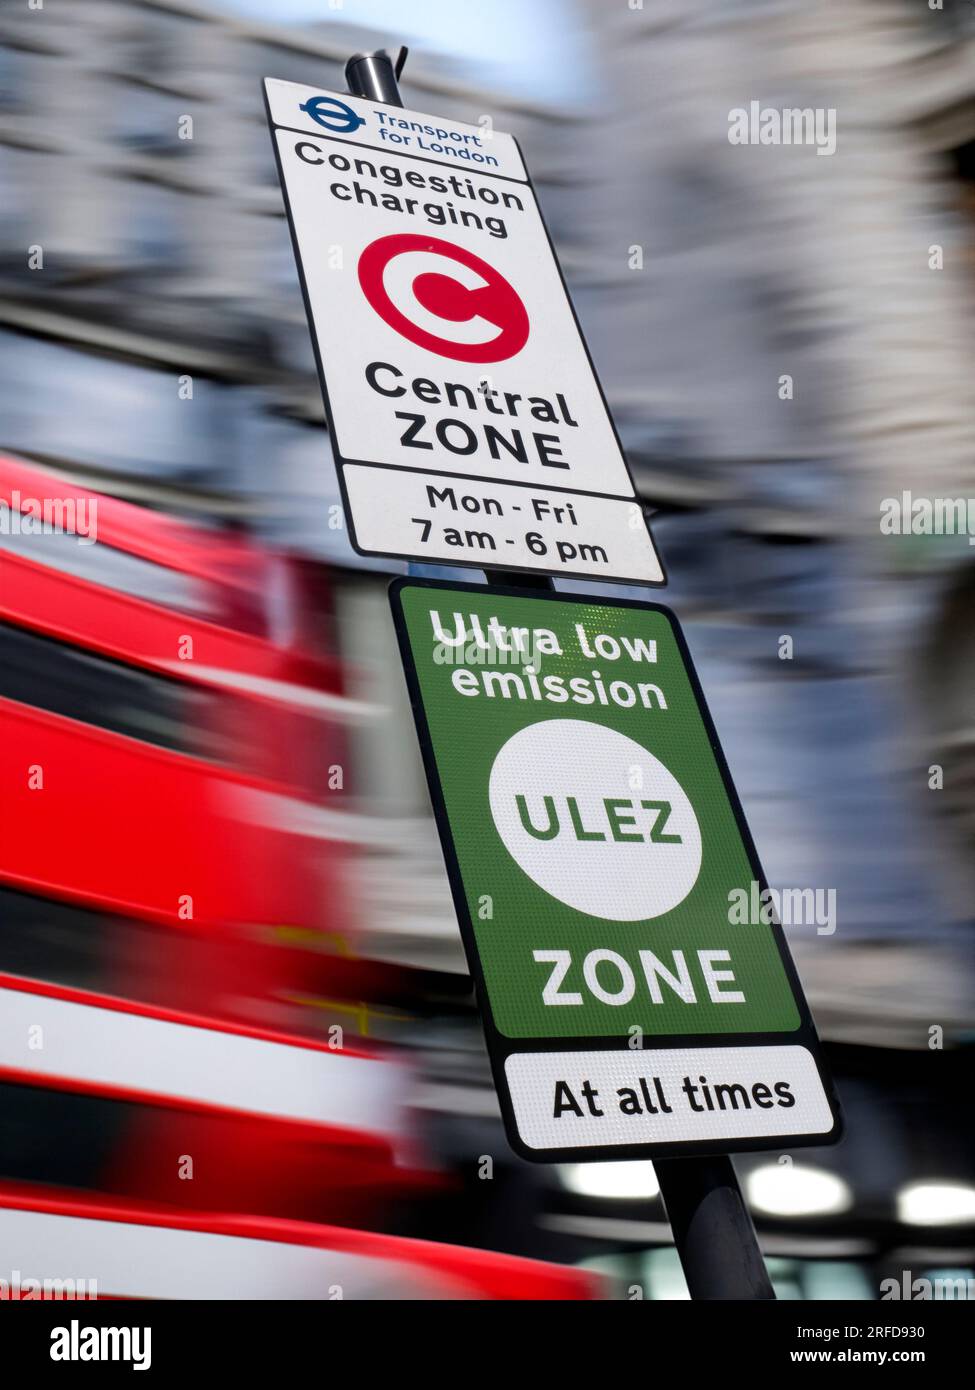 ULEZ" ZONE SIGN CONGESTION SIGNAGE TFL  London area city town background Congestion/Emission charging London zone sign with "ULEZ" ultra low emission zone sign against blurred traffic and city buildings London UK Stock Photo